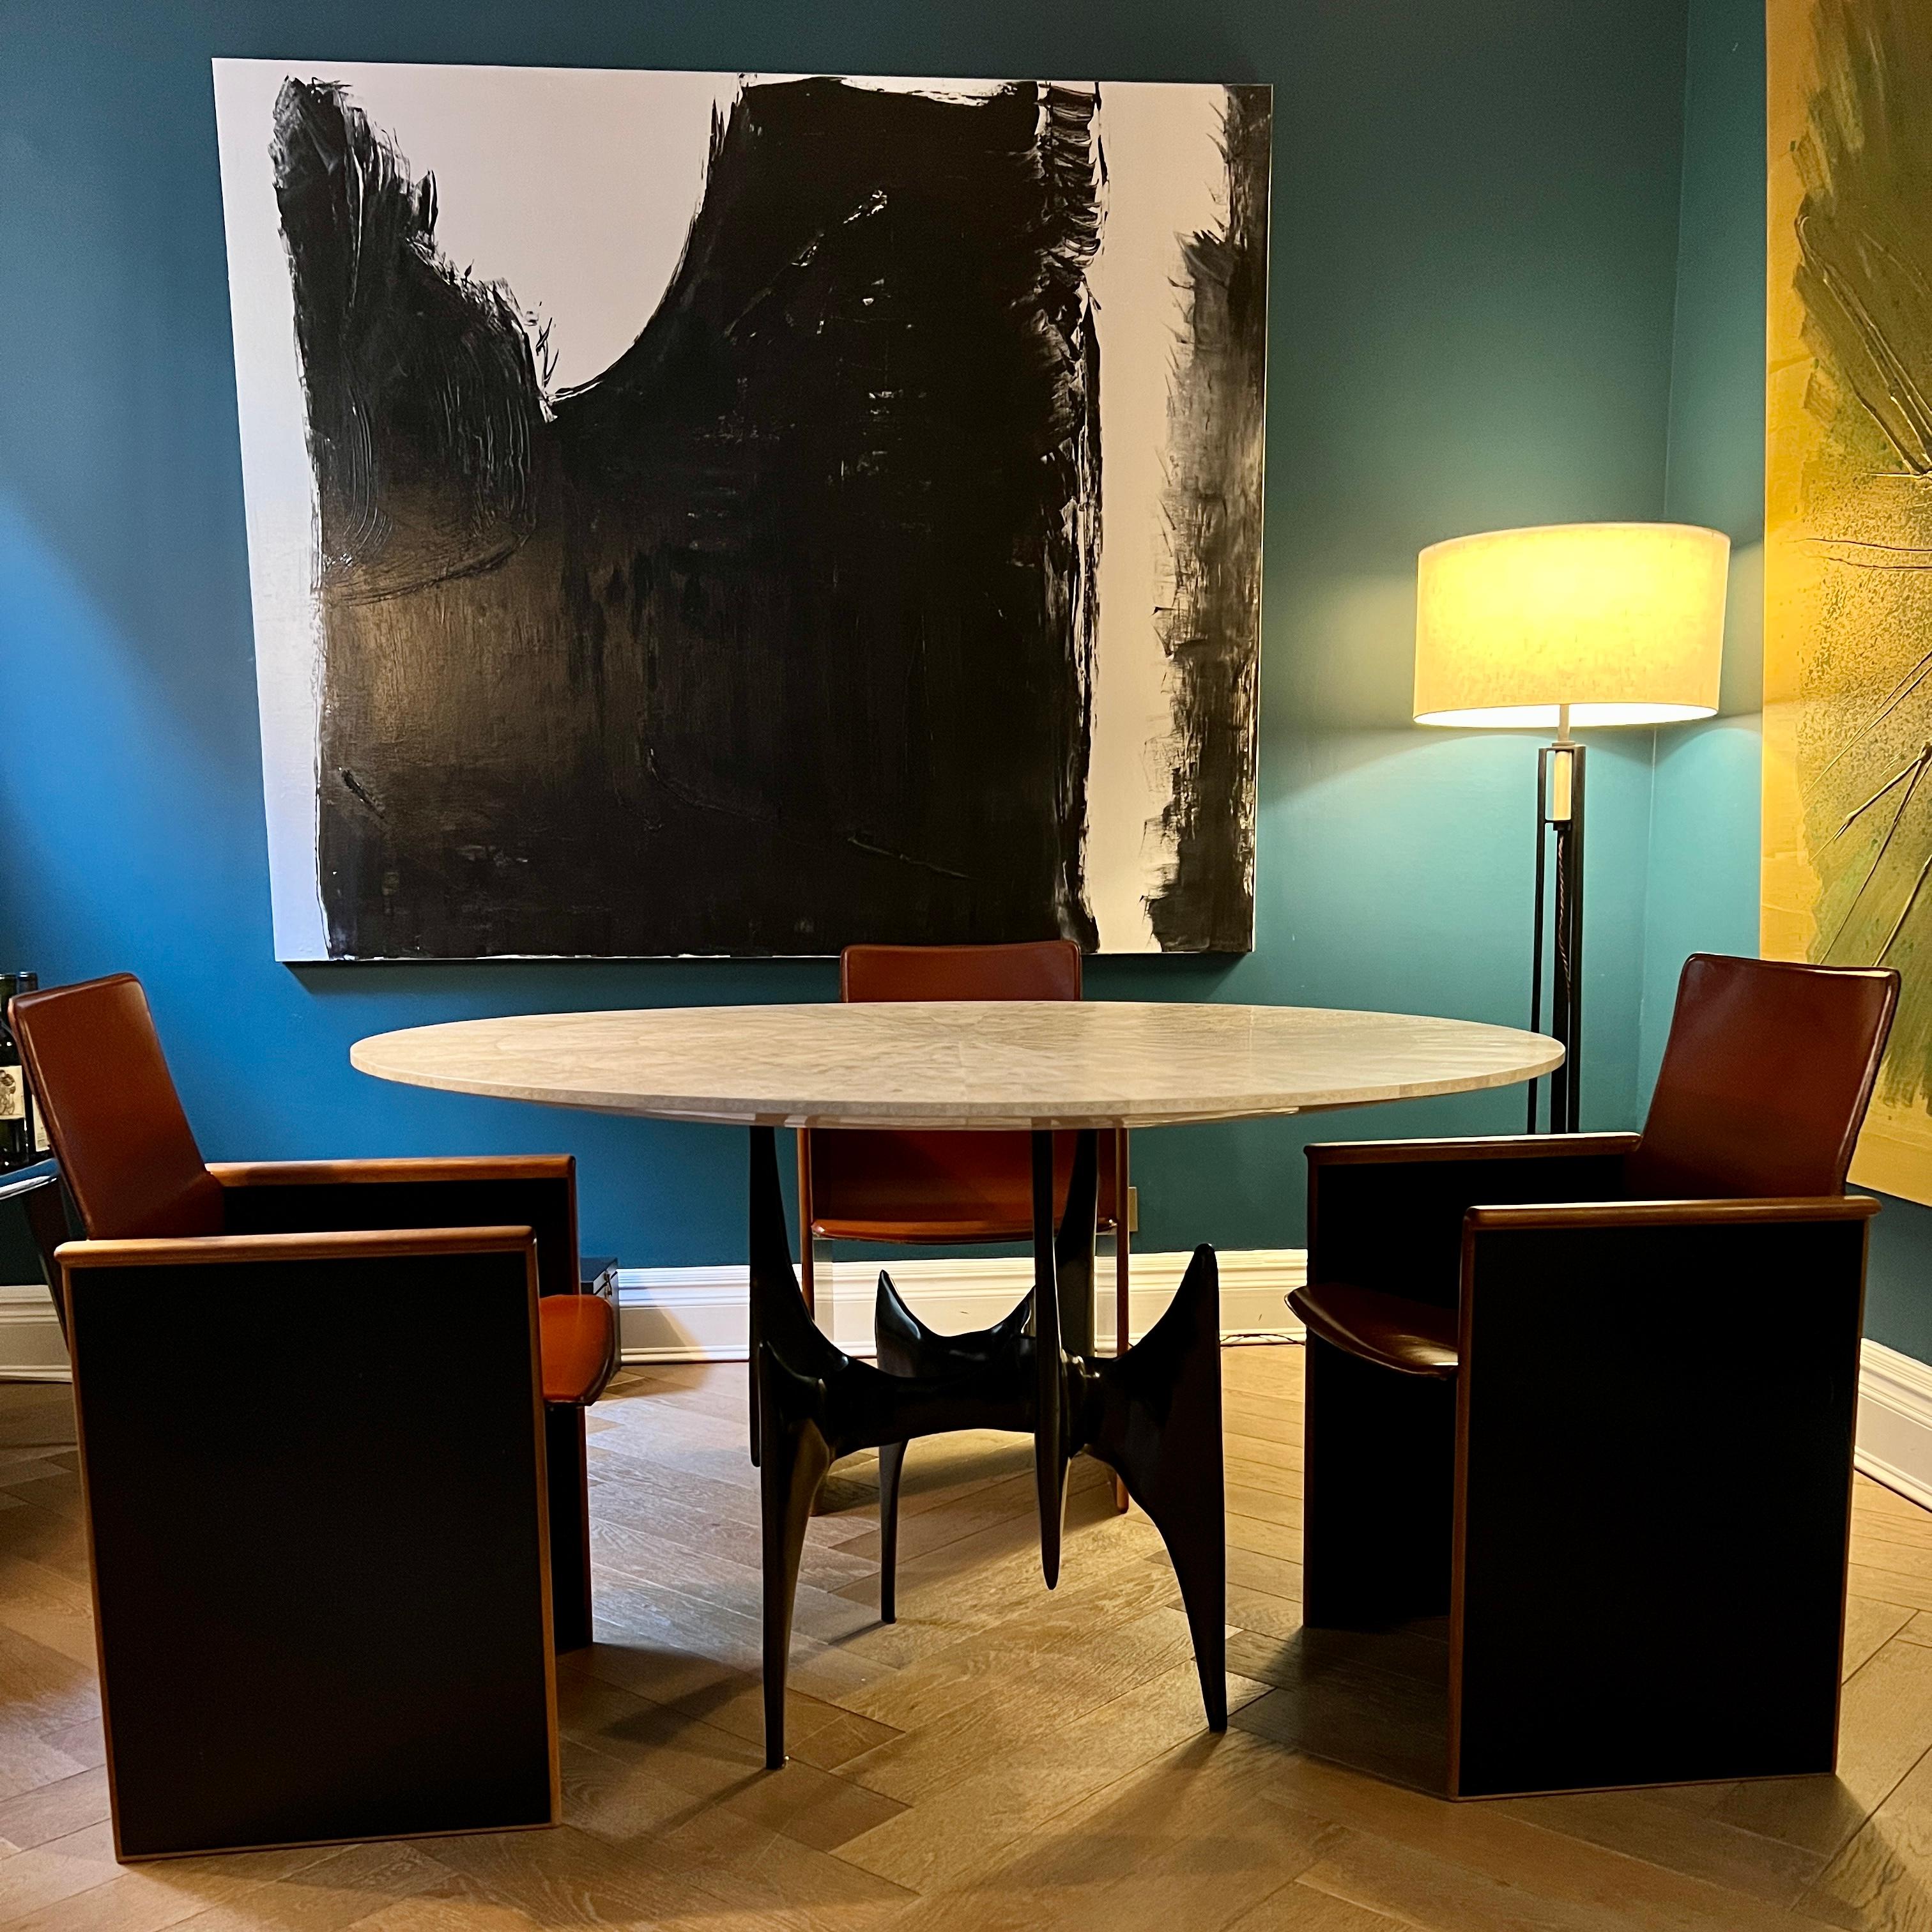 Ella Center / Dining Table in stock at the Elan Atelier New York showroom. 

A metalwork showcase. The Ella Table has mid-century modern stylistic exuberance, with modern poise and judicious restraint. 

Finish:
Base: Cast bronze with antique